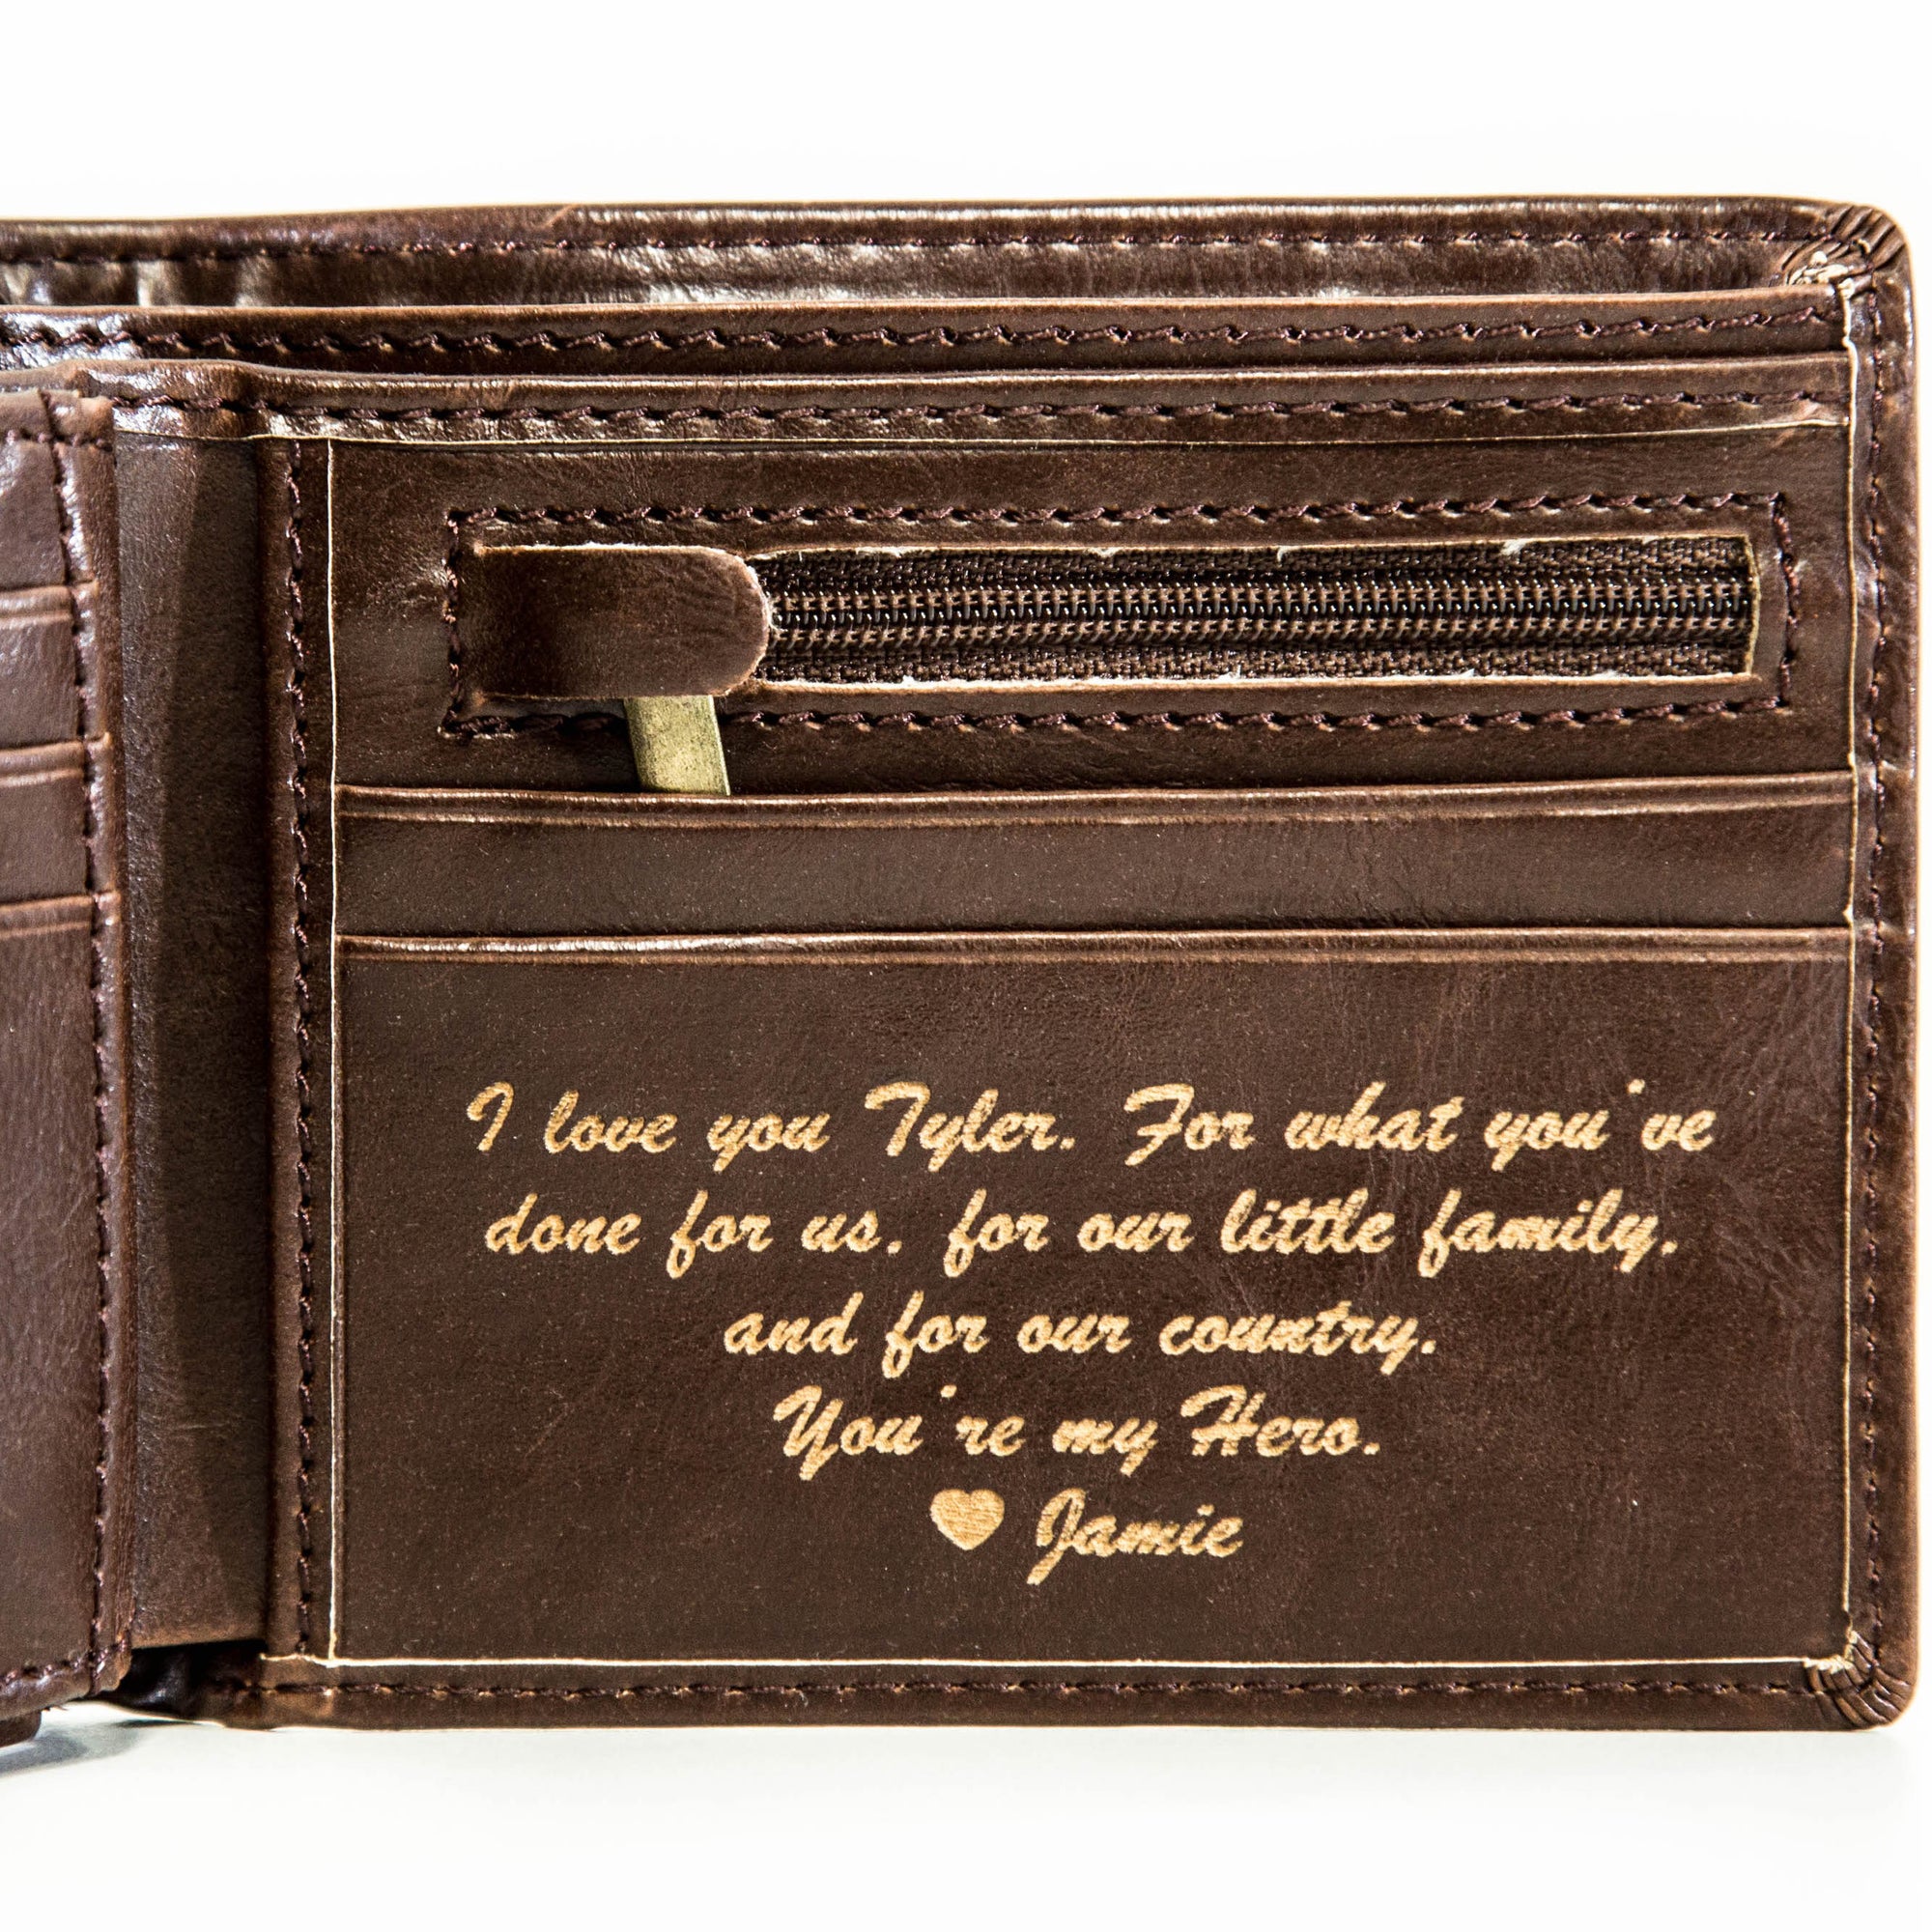 Personalized leather wallet with a special note